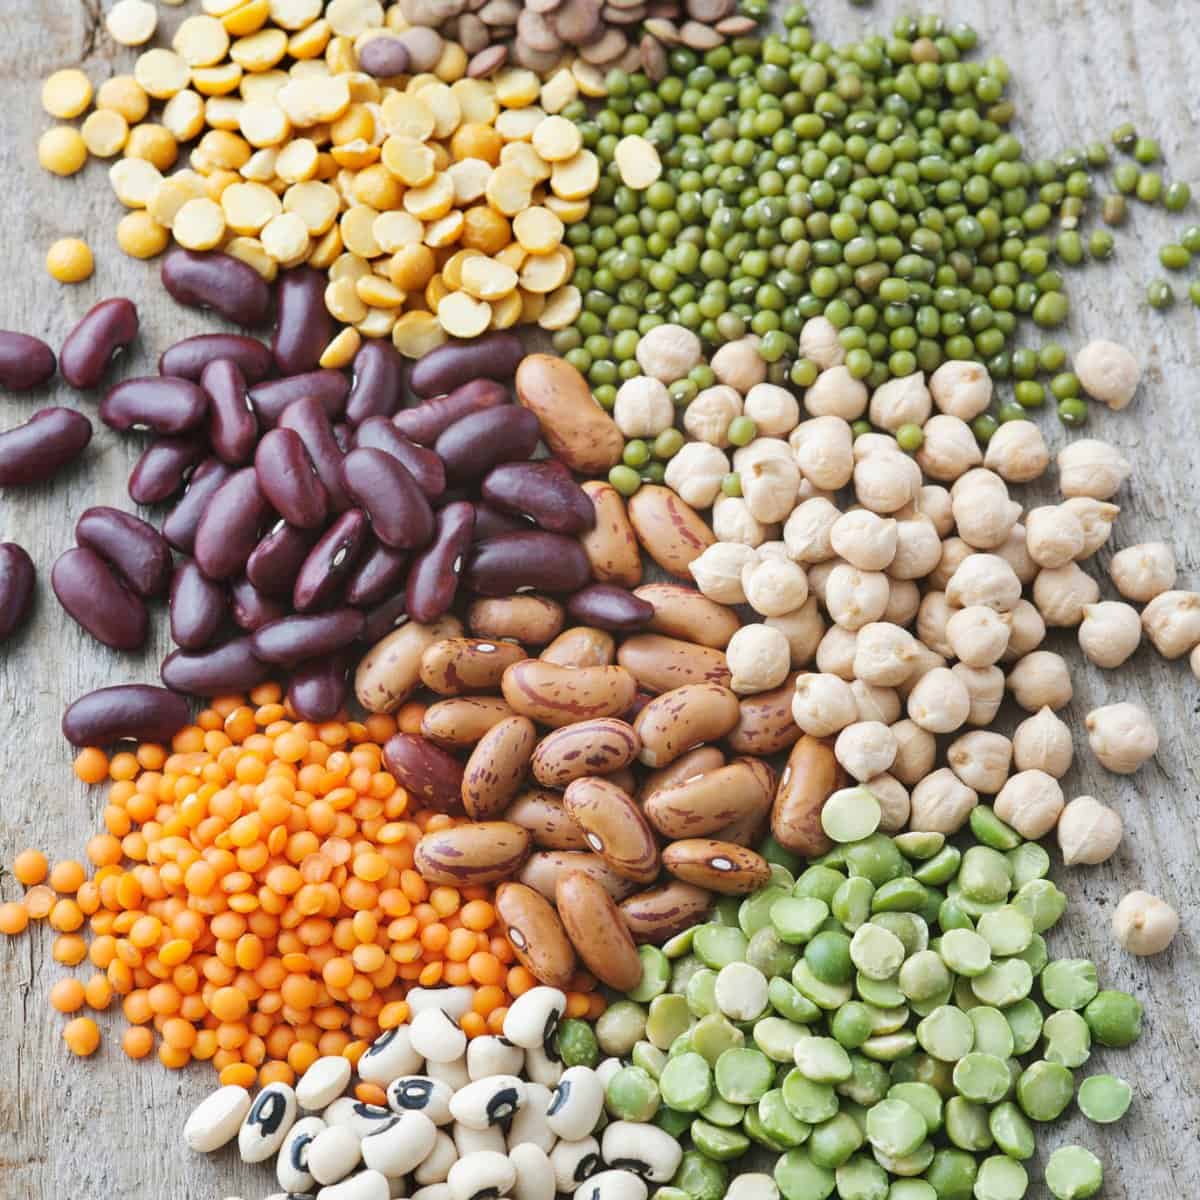 How are beans used in Asian cooking